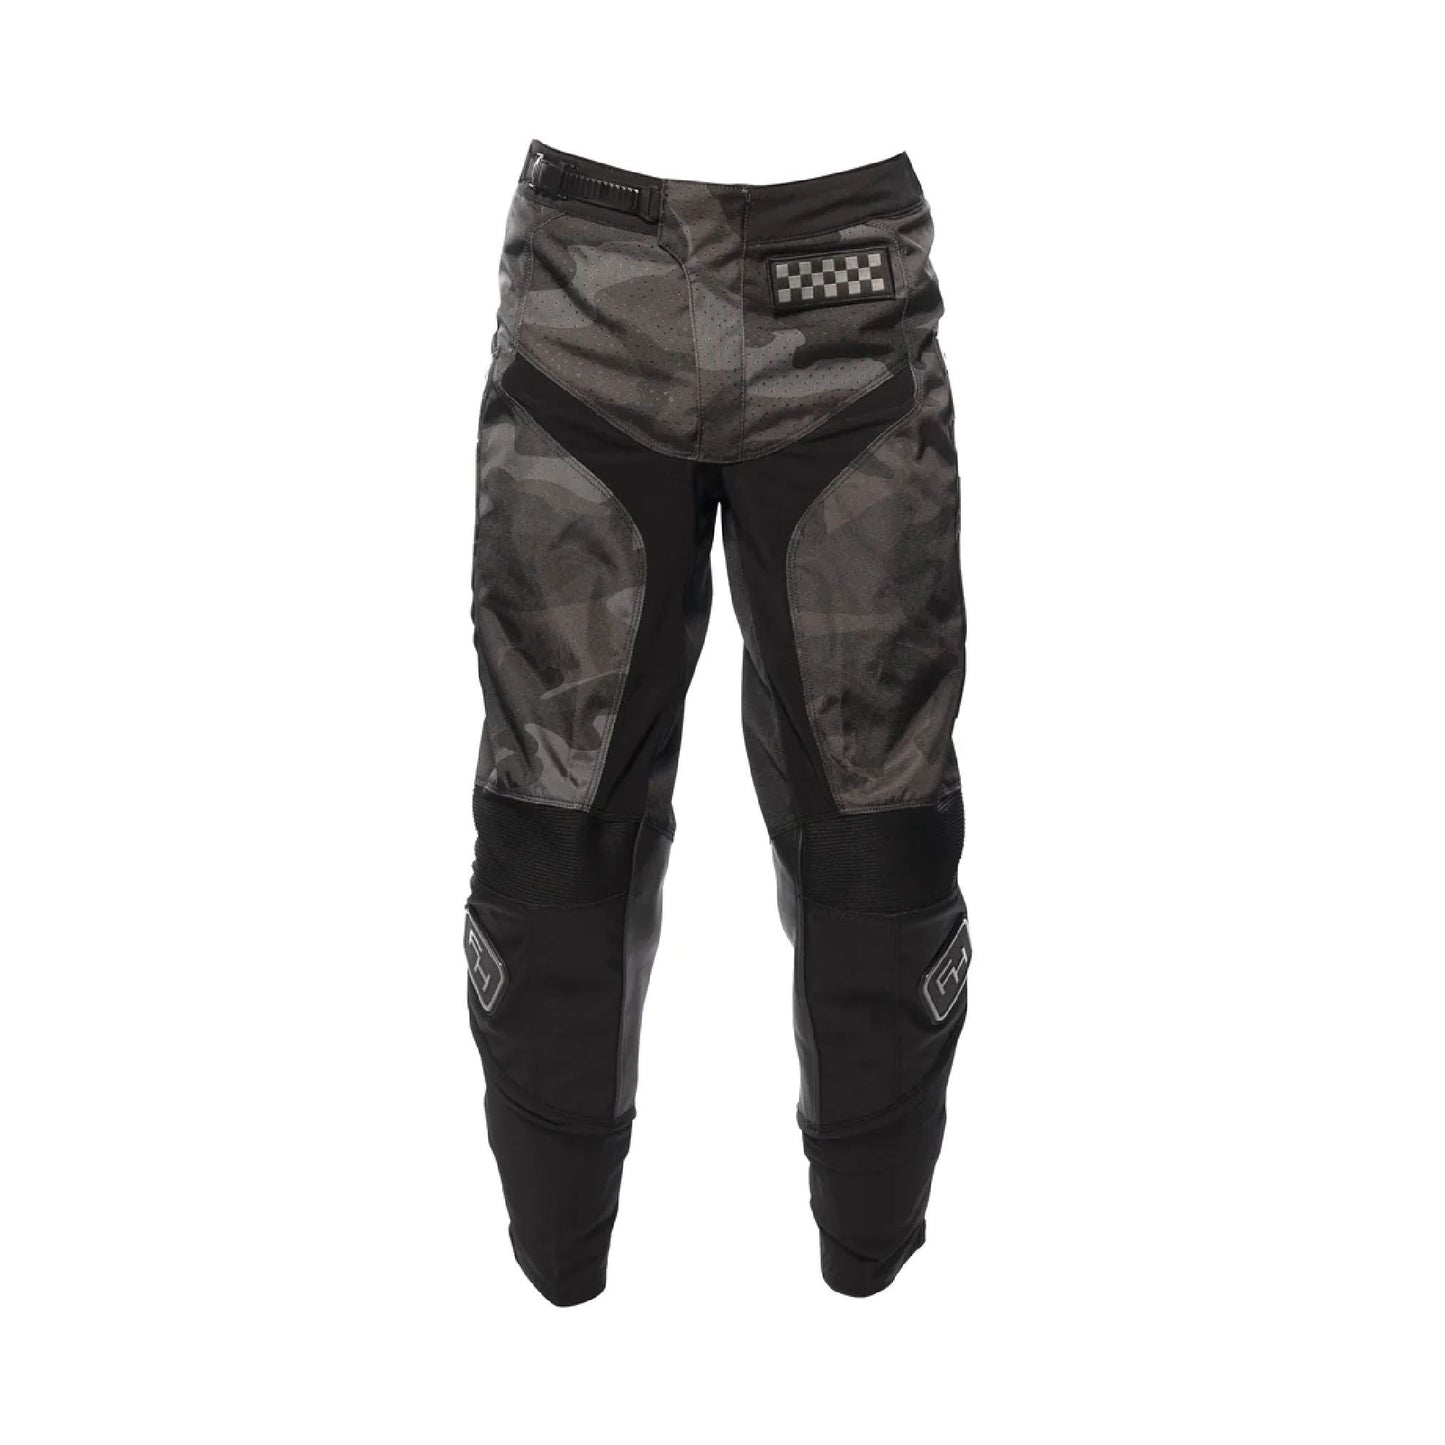 Fasthouse Youth Grindhouse Pants Camo Black Bike Pants